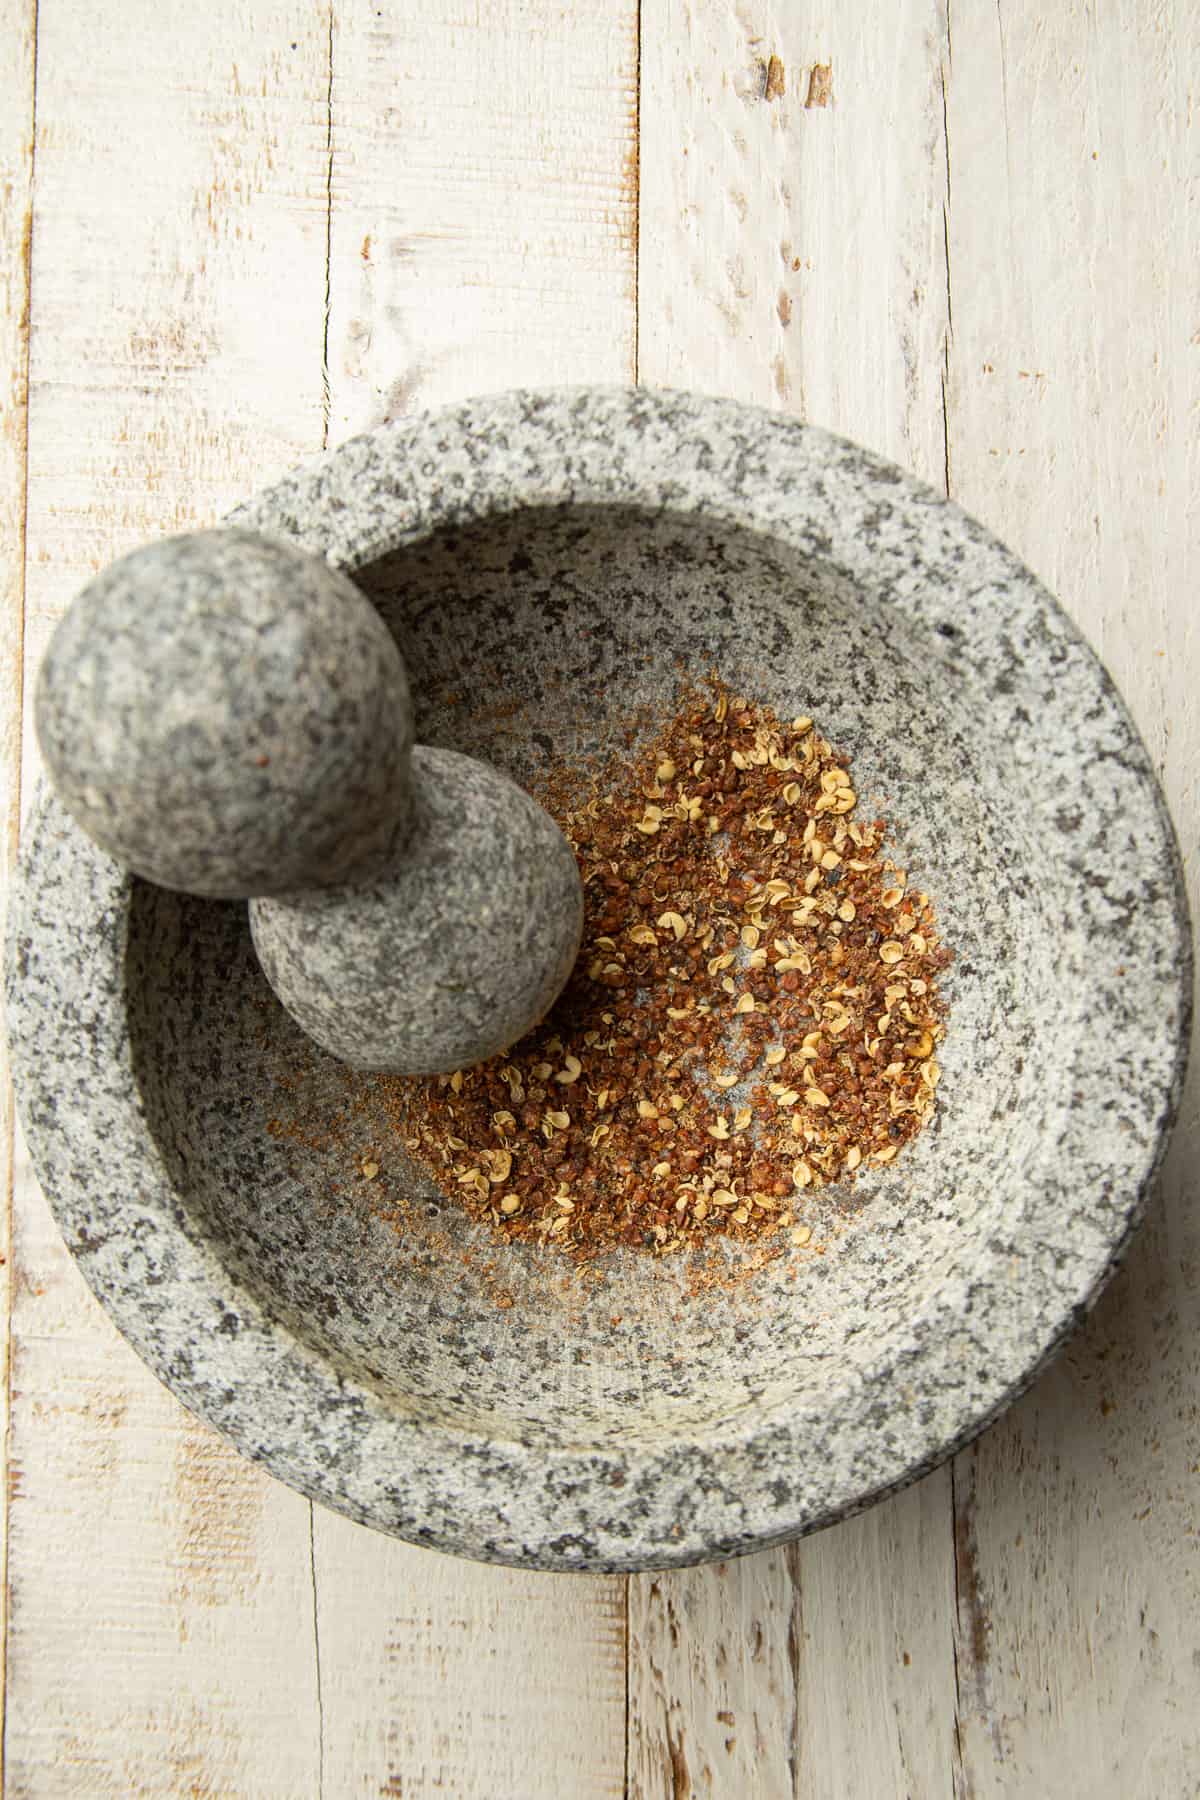 Crushed szechuan peppercorns in a mortar and pestle.